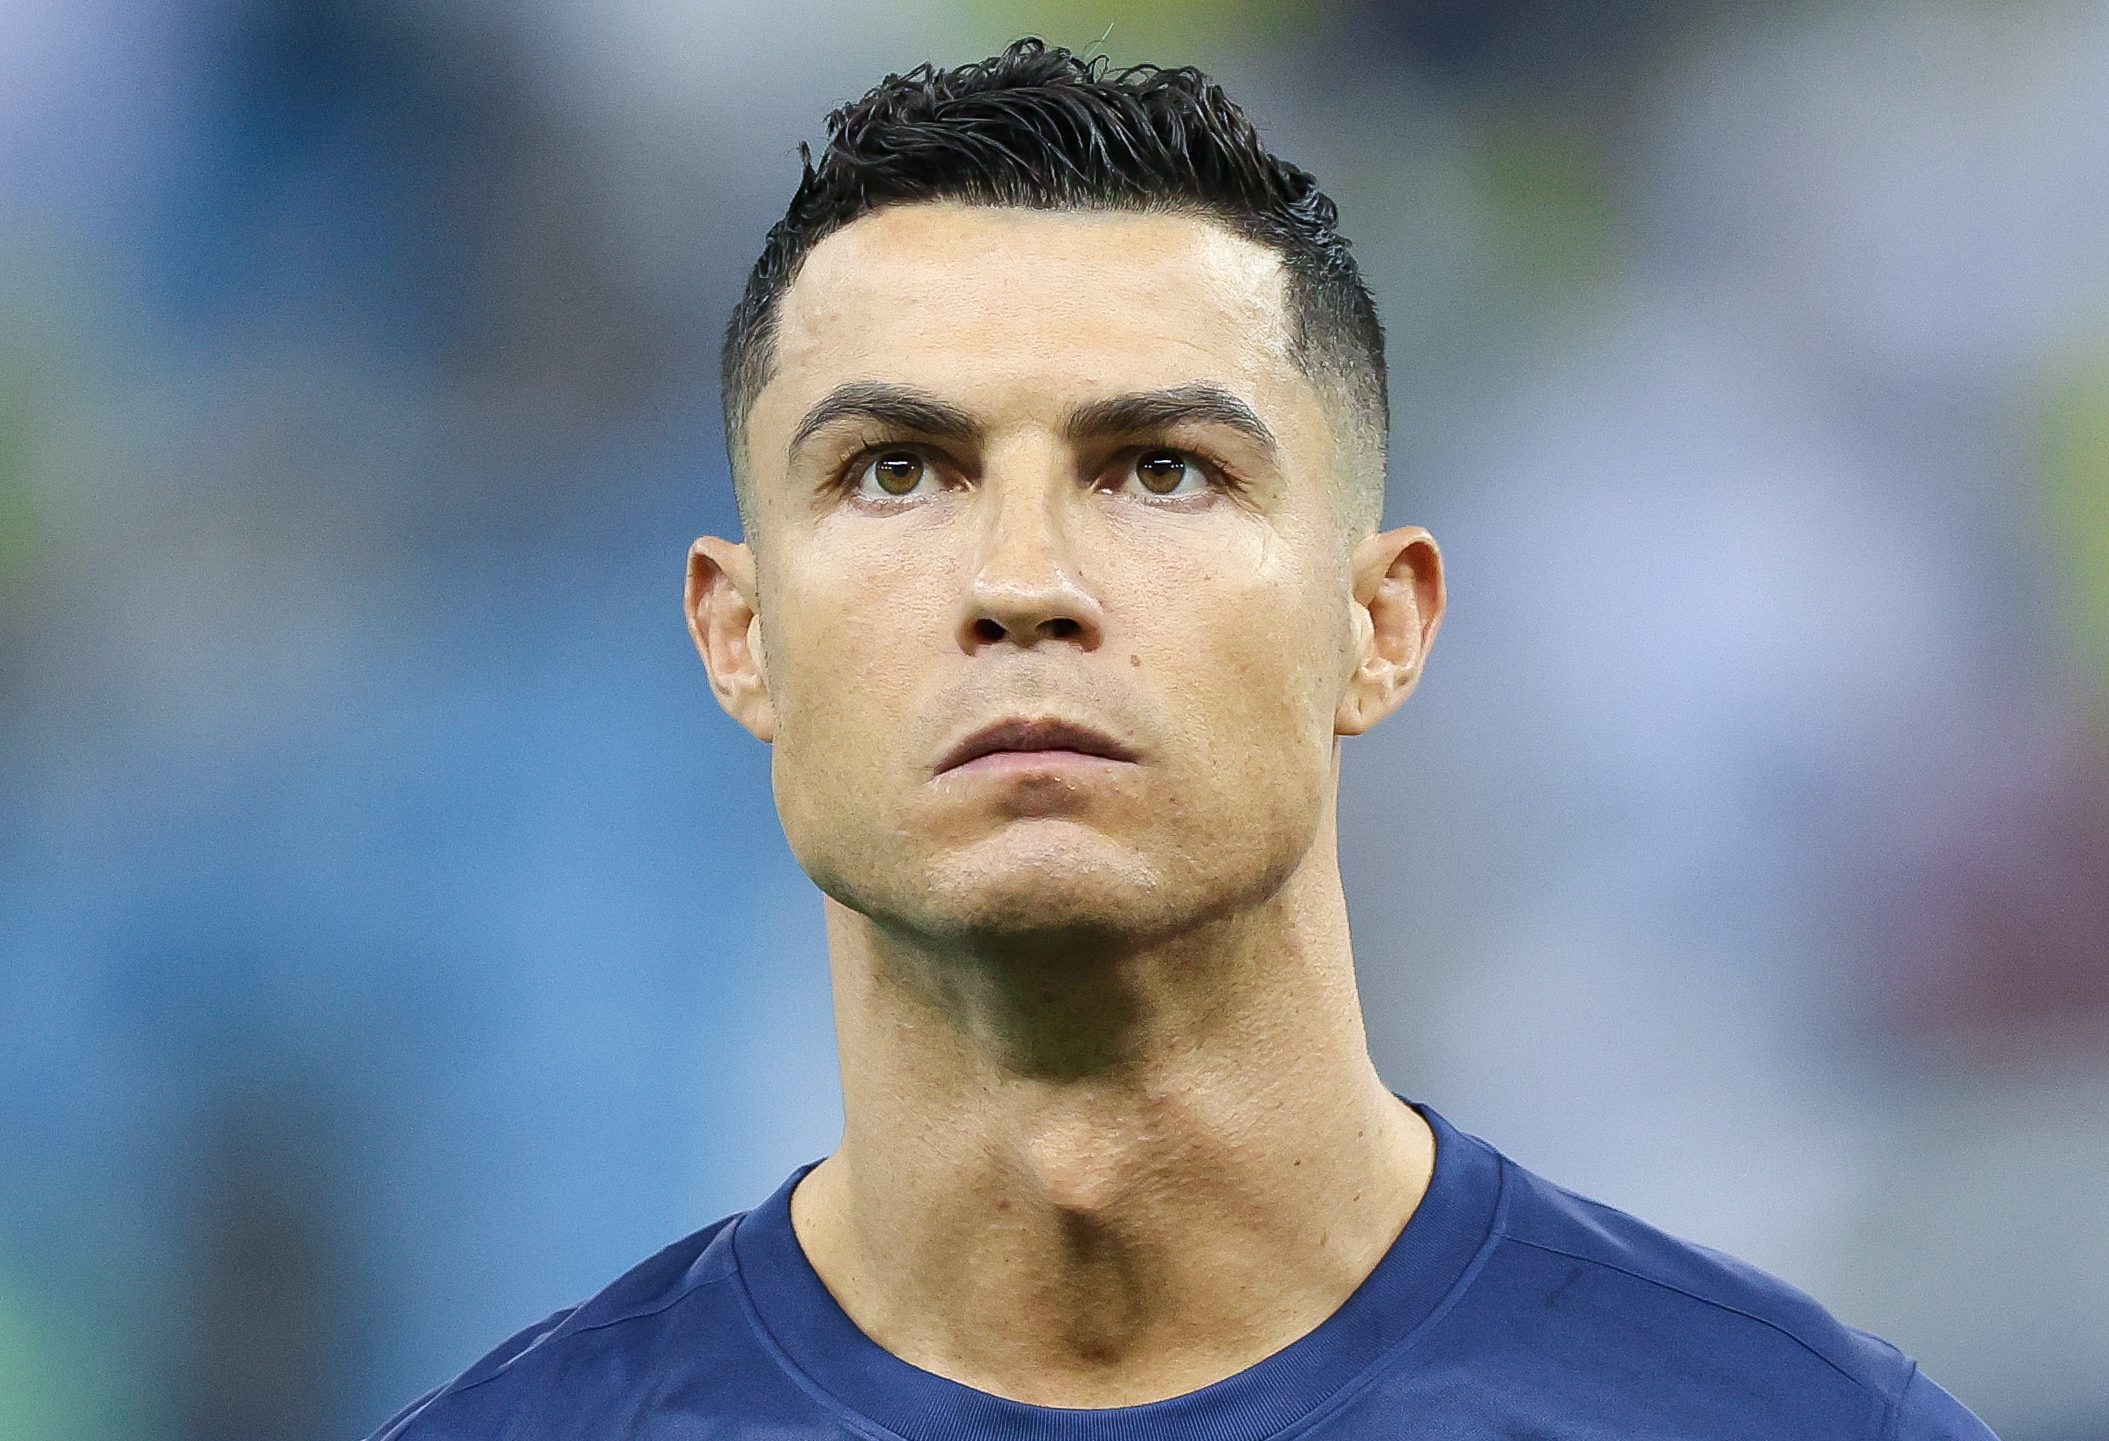 cristiano-ronaldo-orders-to-silence-rival-fans-who-chanted-“messi”-during-the-match-[video]